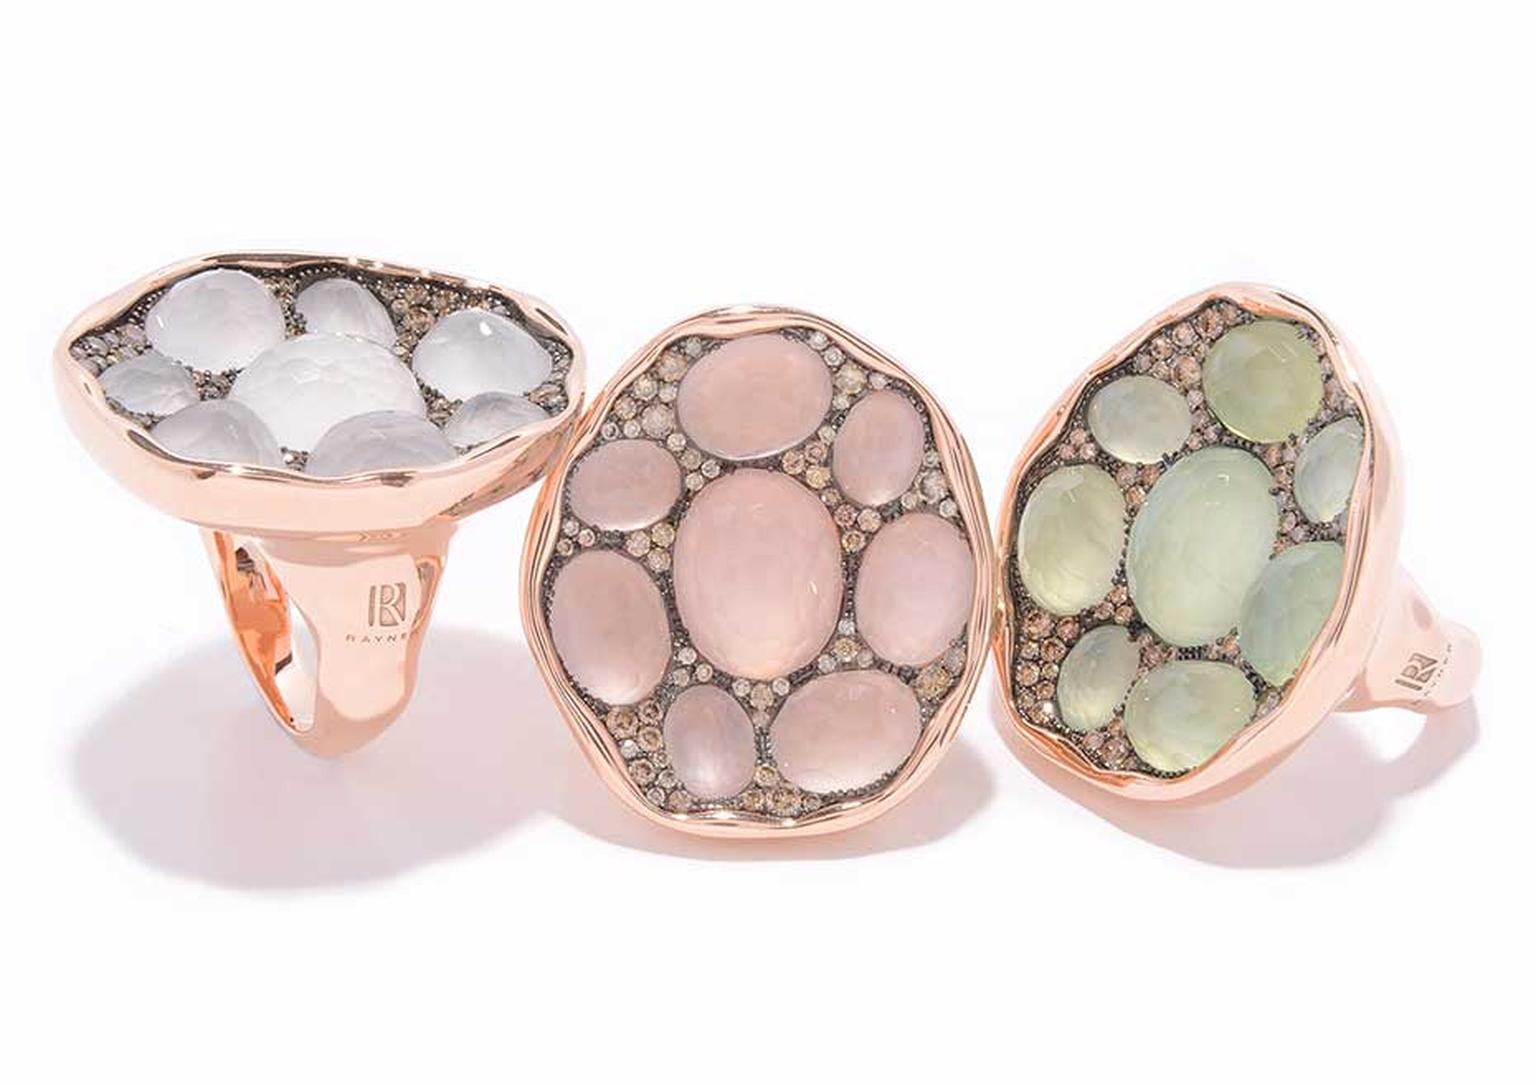 Rodney Rayner red gold rings featuring, from left to right, white quartz, rose quartz and prehnites surrounded by a sprinkling of diamonds.